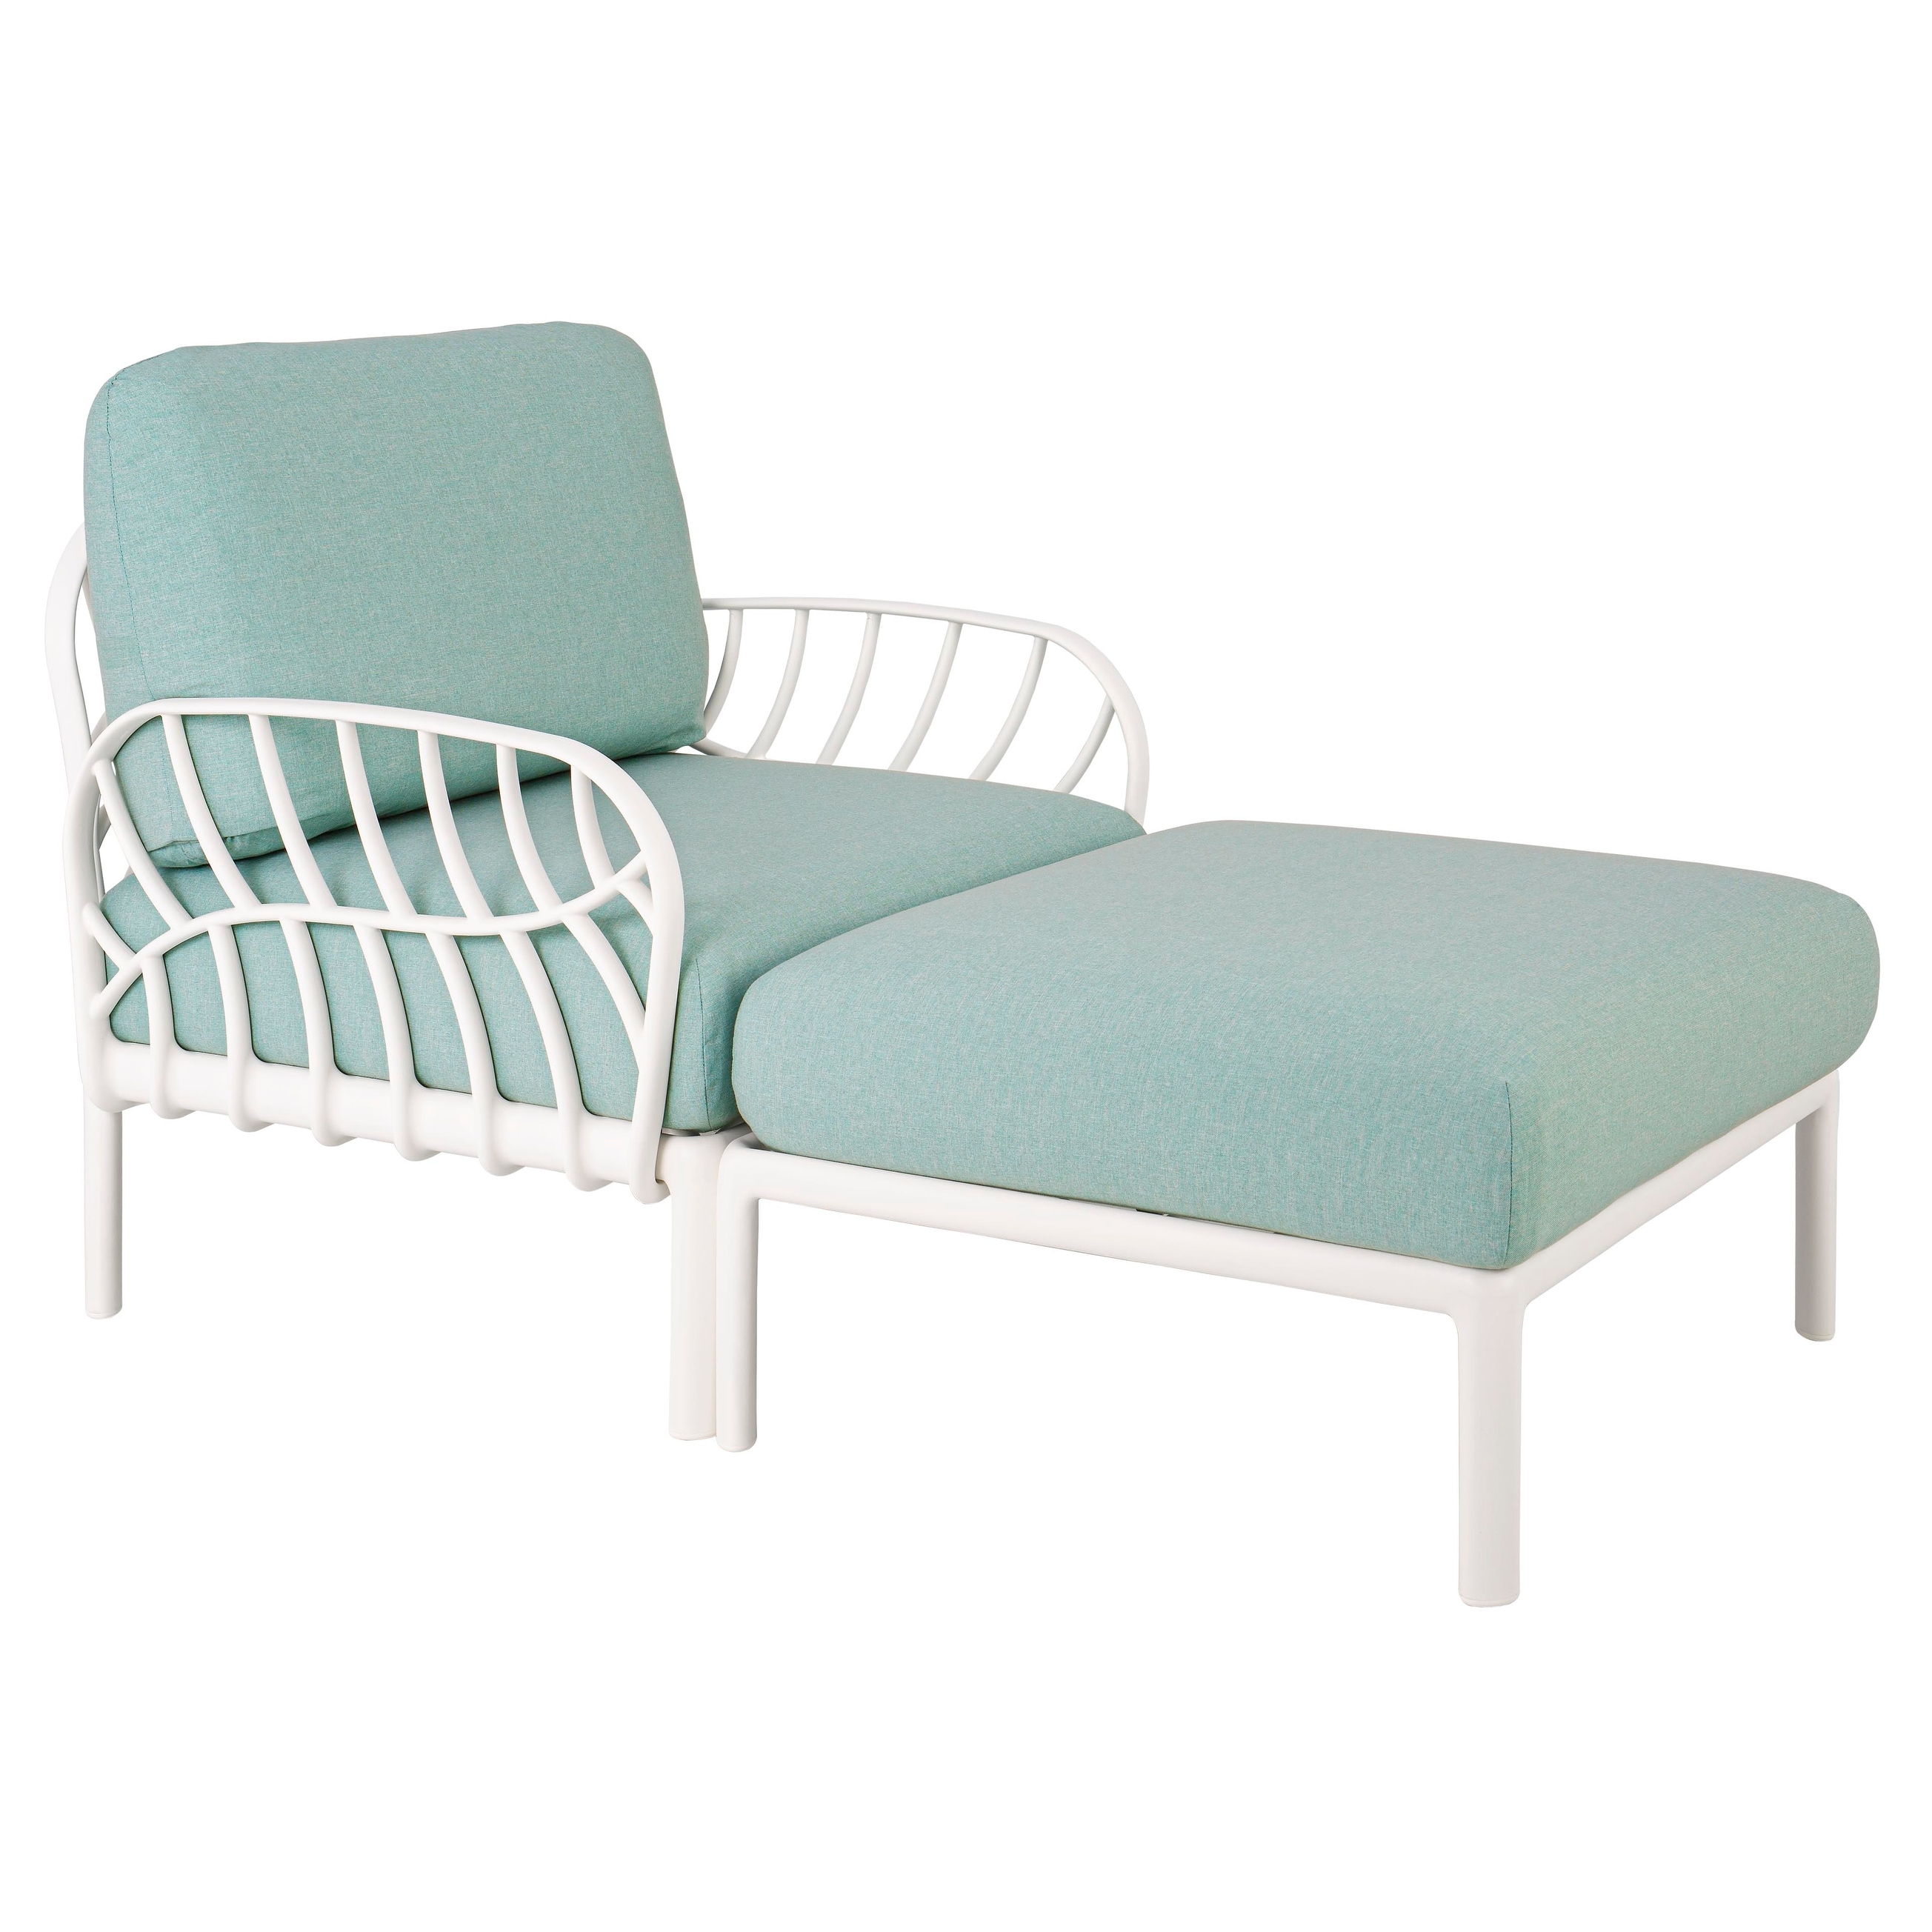 Laurel Resin All Weather Chaise Lounge With Cushions